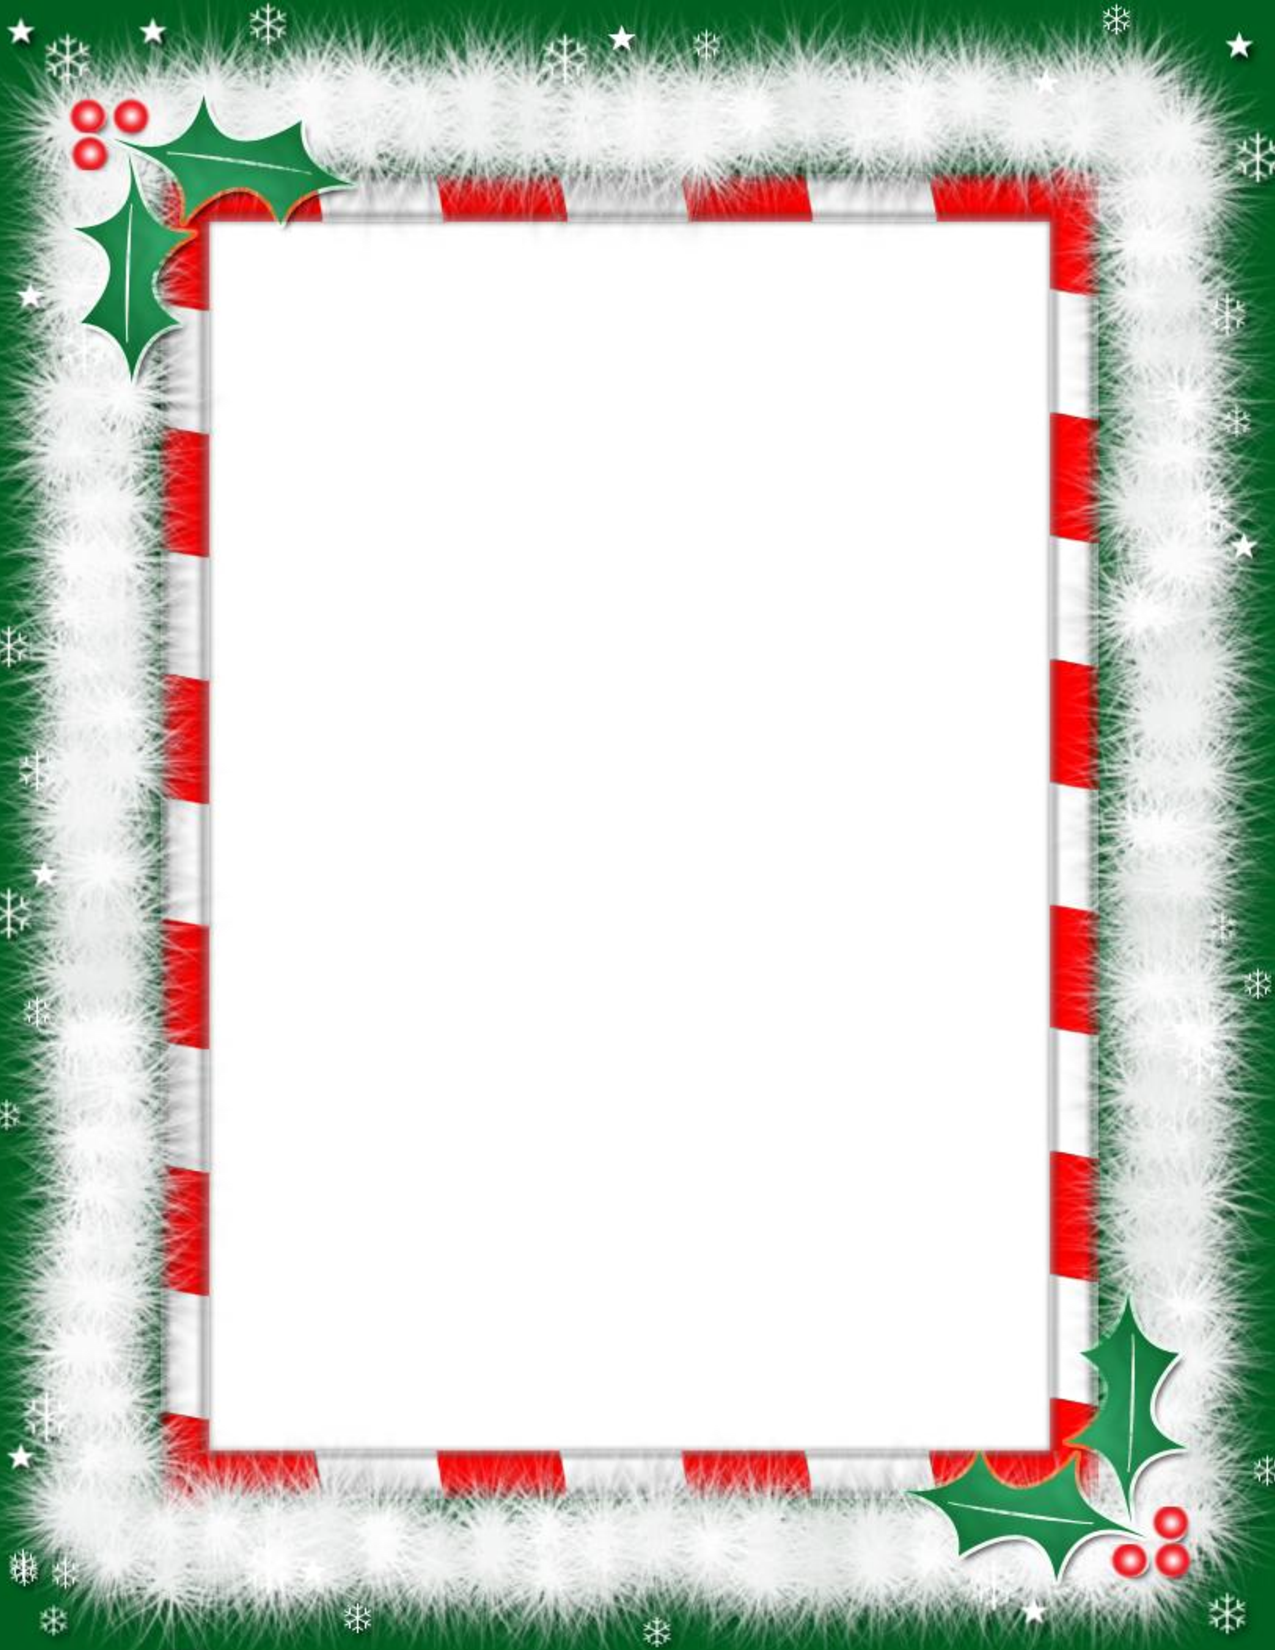 51 Best Christmas Card Border Templates Photo for Christmas Card Border Templates